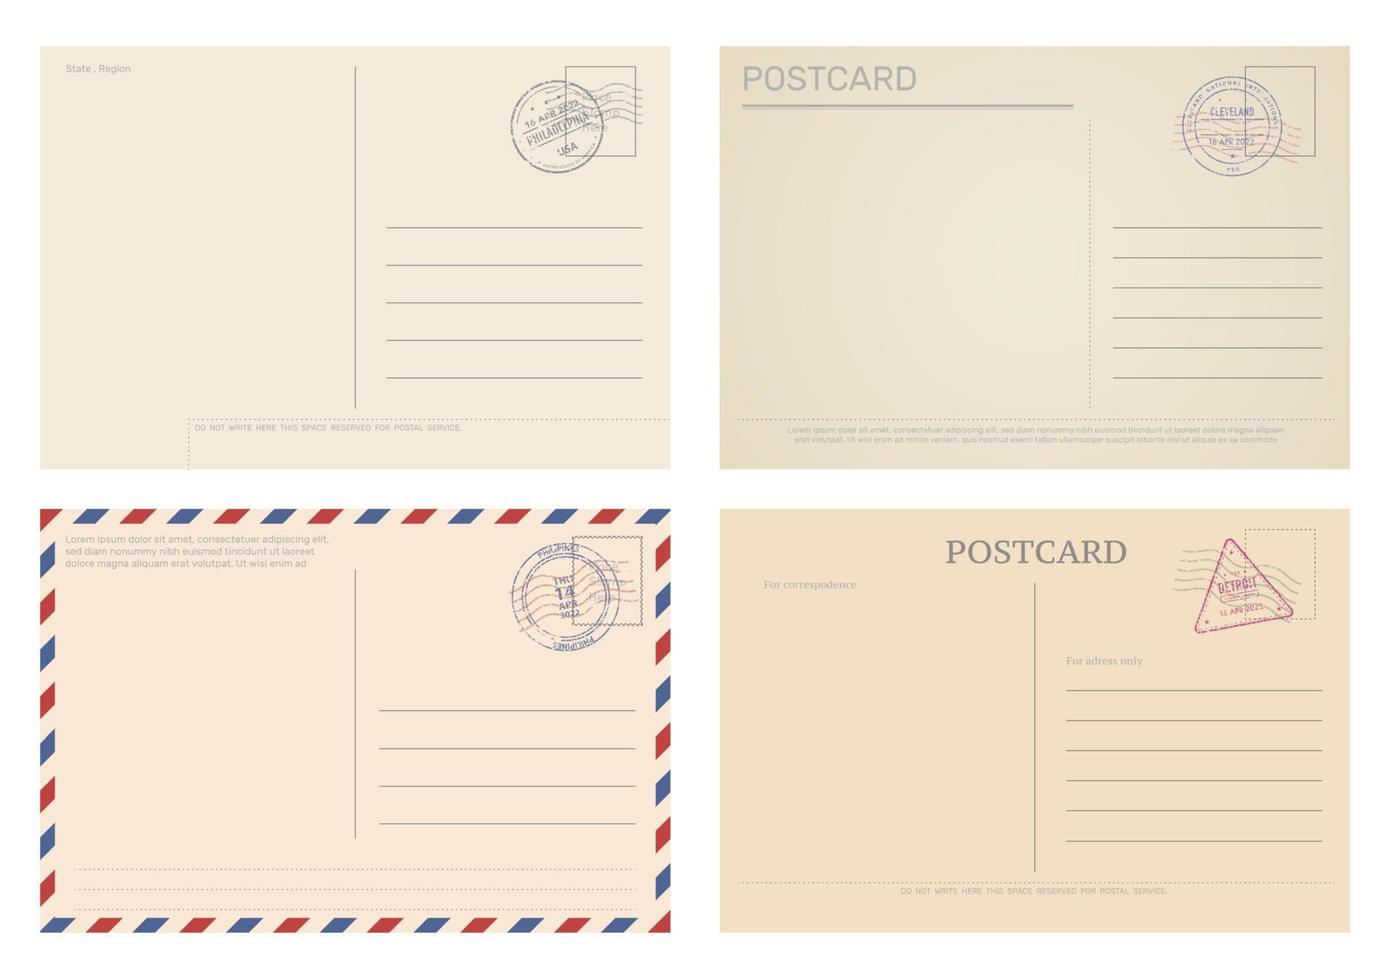 Vintage postcard and air mail envelope template vector